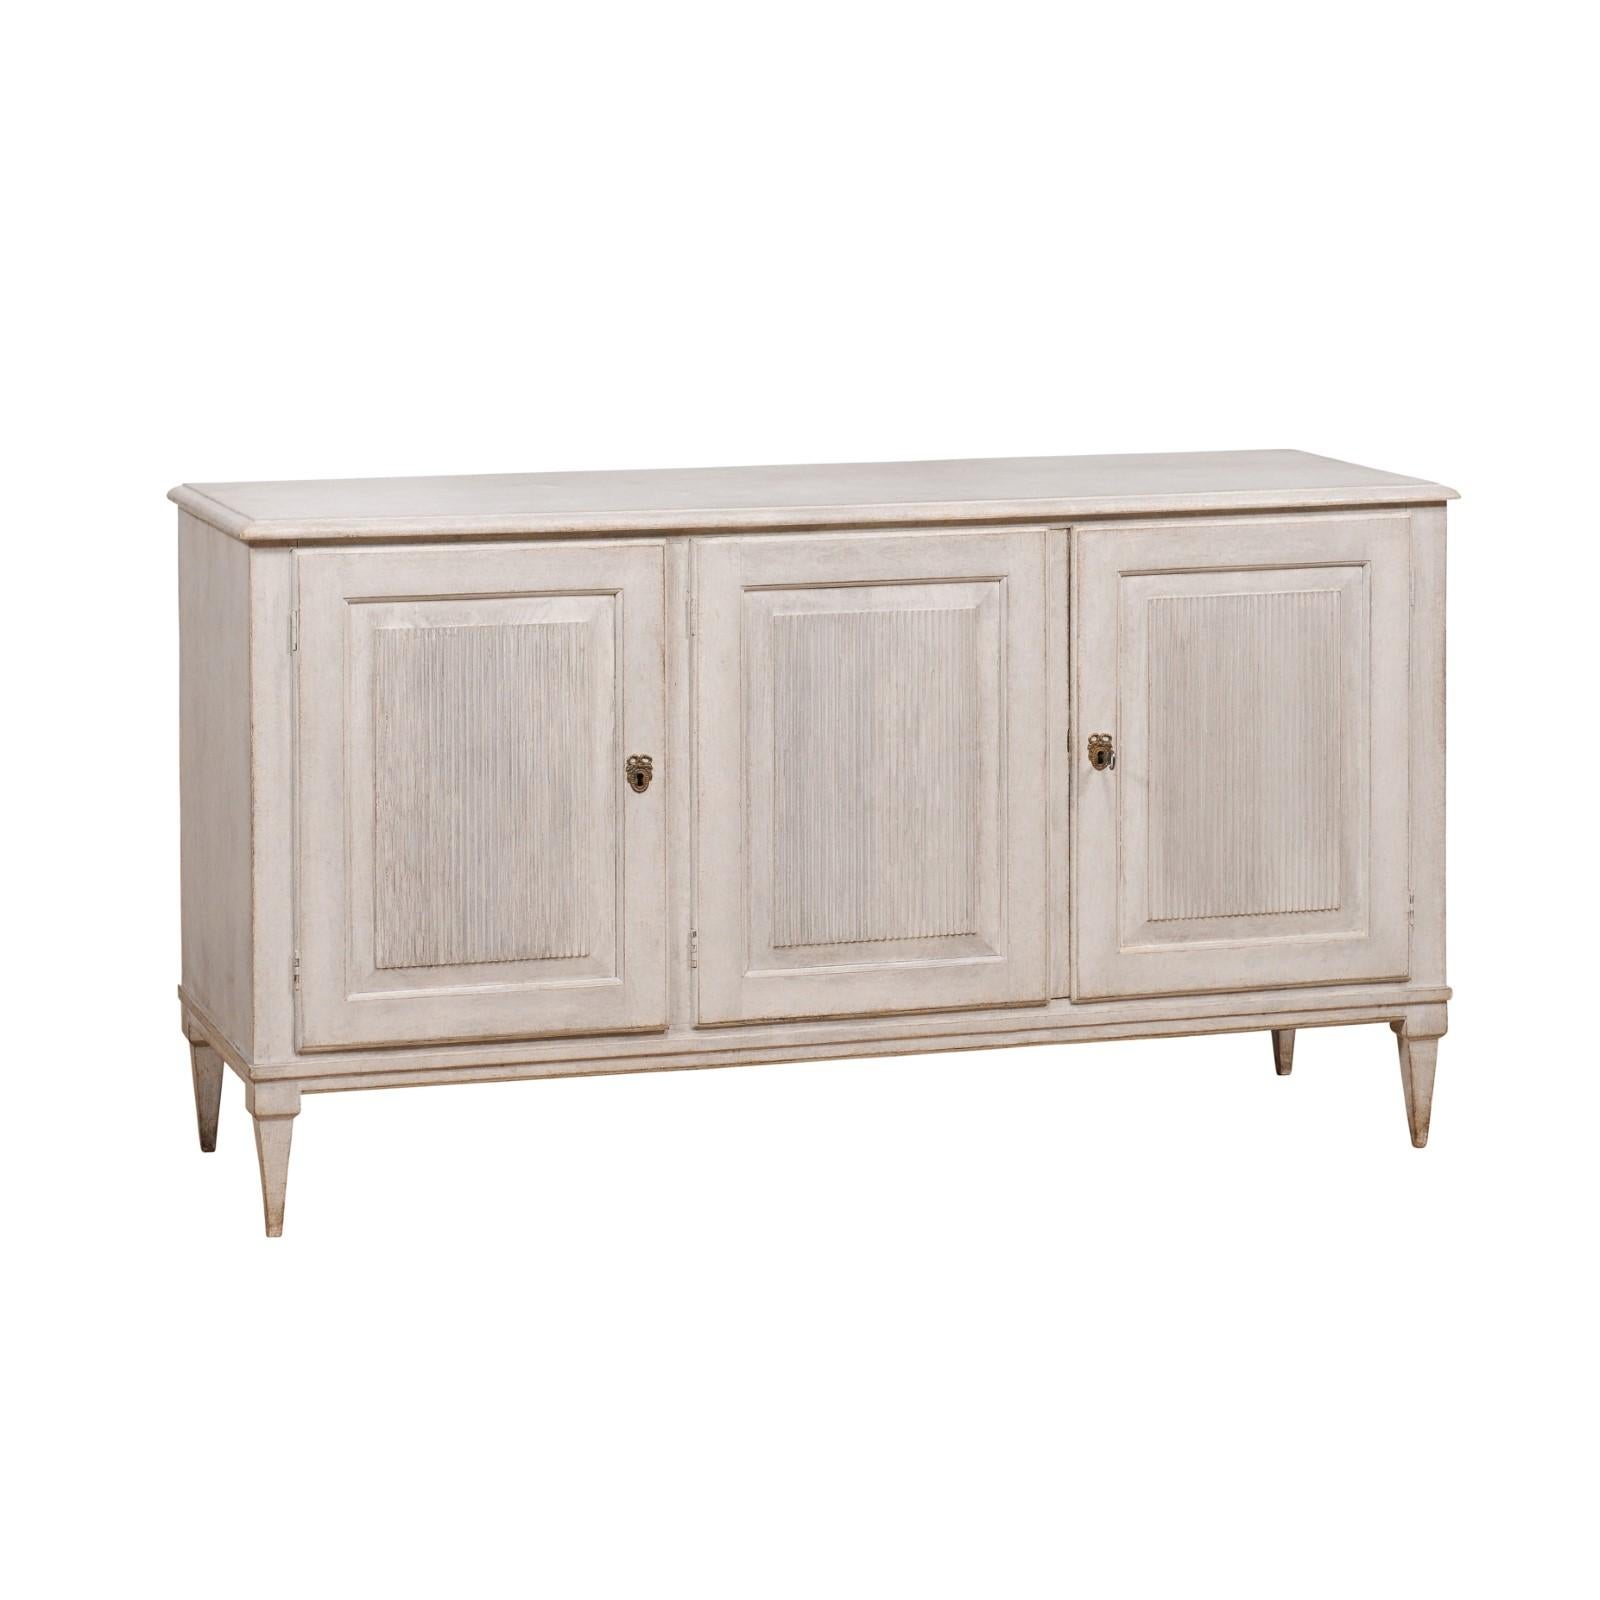 A Swedish Gustavian style sideboard from the 19th century with antique light gray finish, three carved reeded doors, inner drawer and tapered legs. Channeling the timeless beauty of Swedish craftsmanship, this Gustavian style sideboard from the 19th